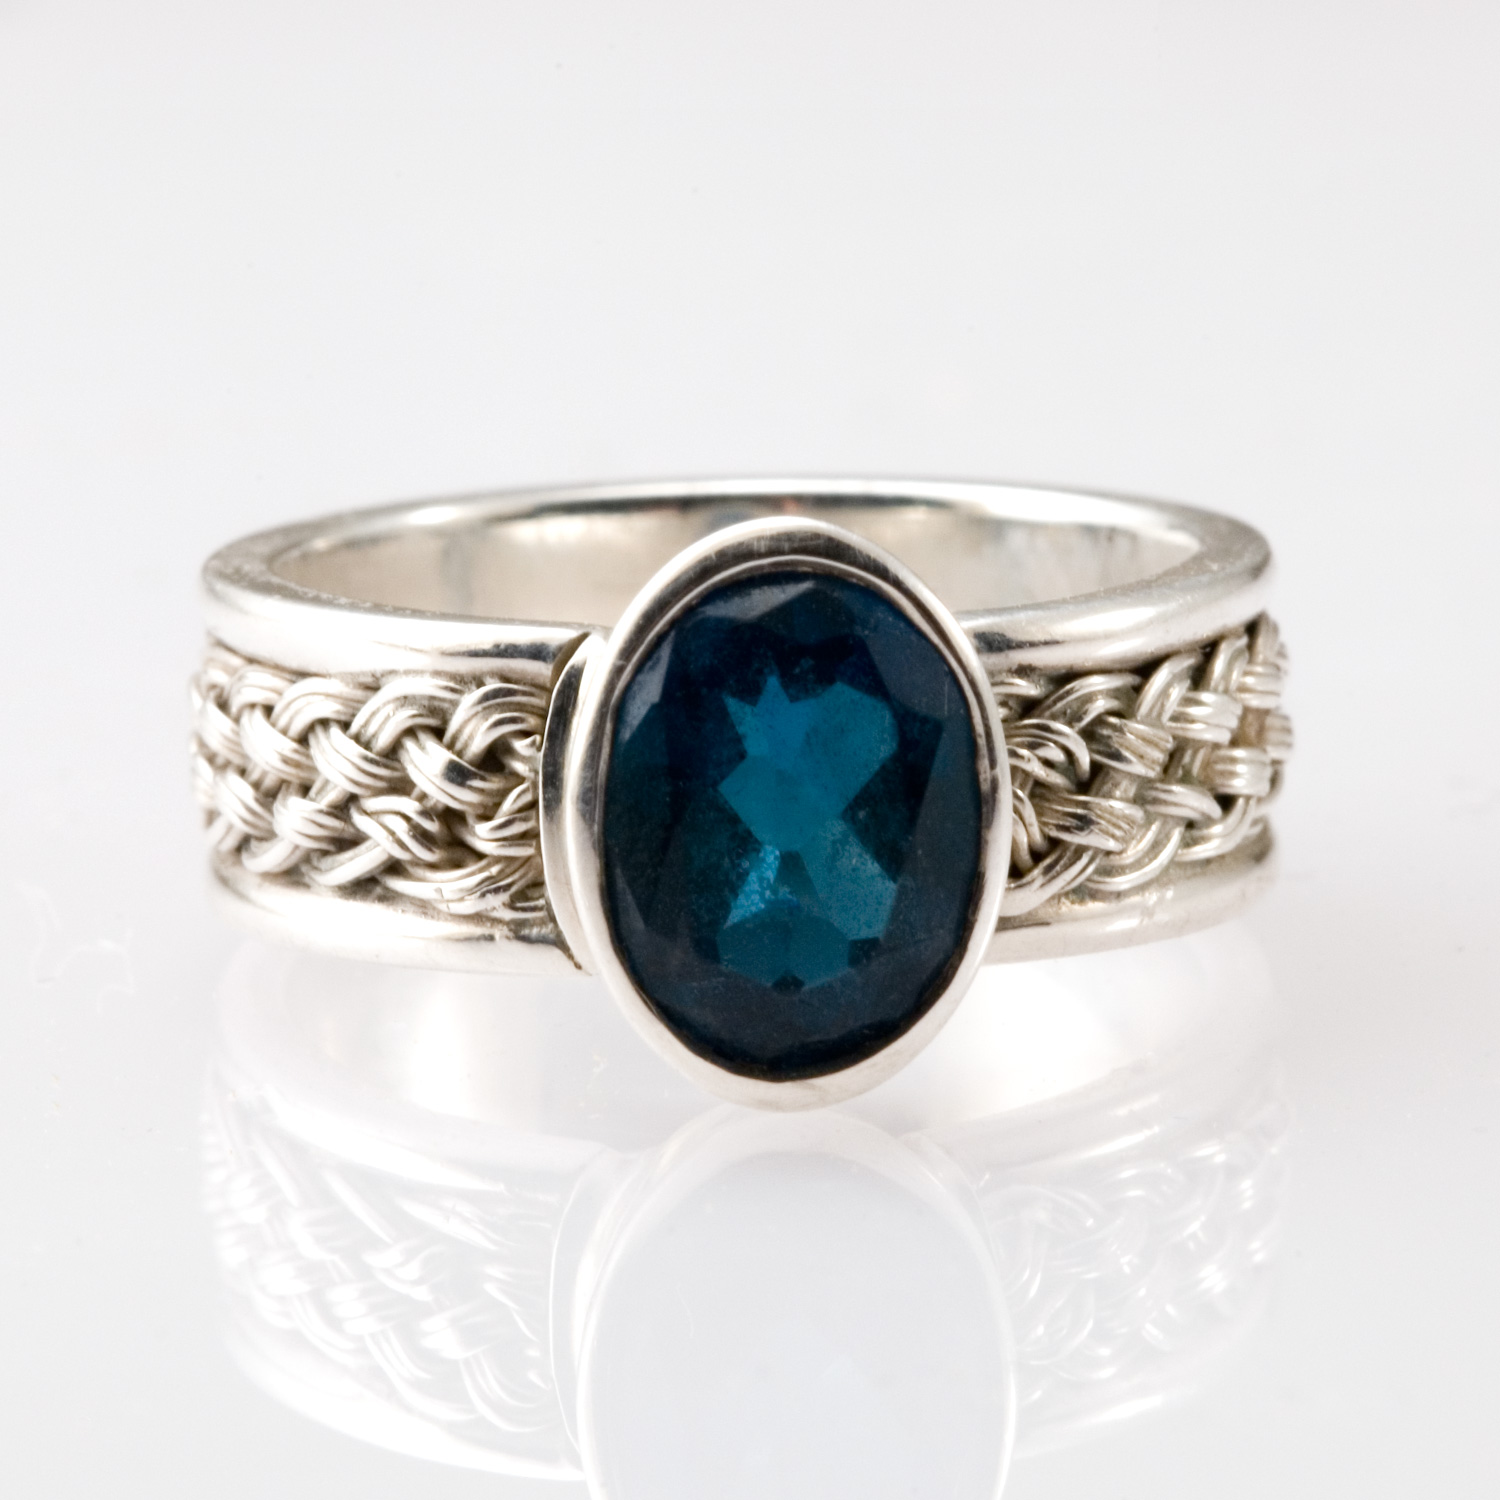 Oval Blue Topaz Inset Weave Ring in sterling silver by Tamberlaine